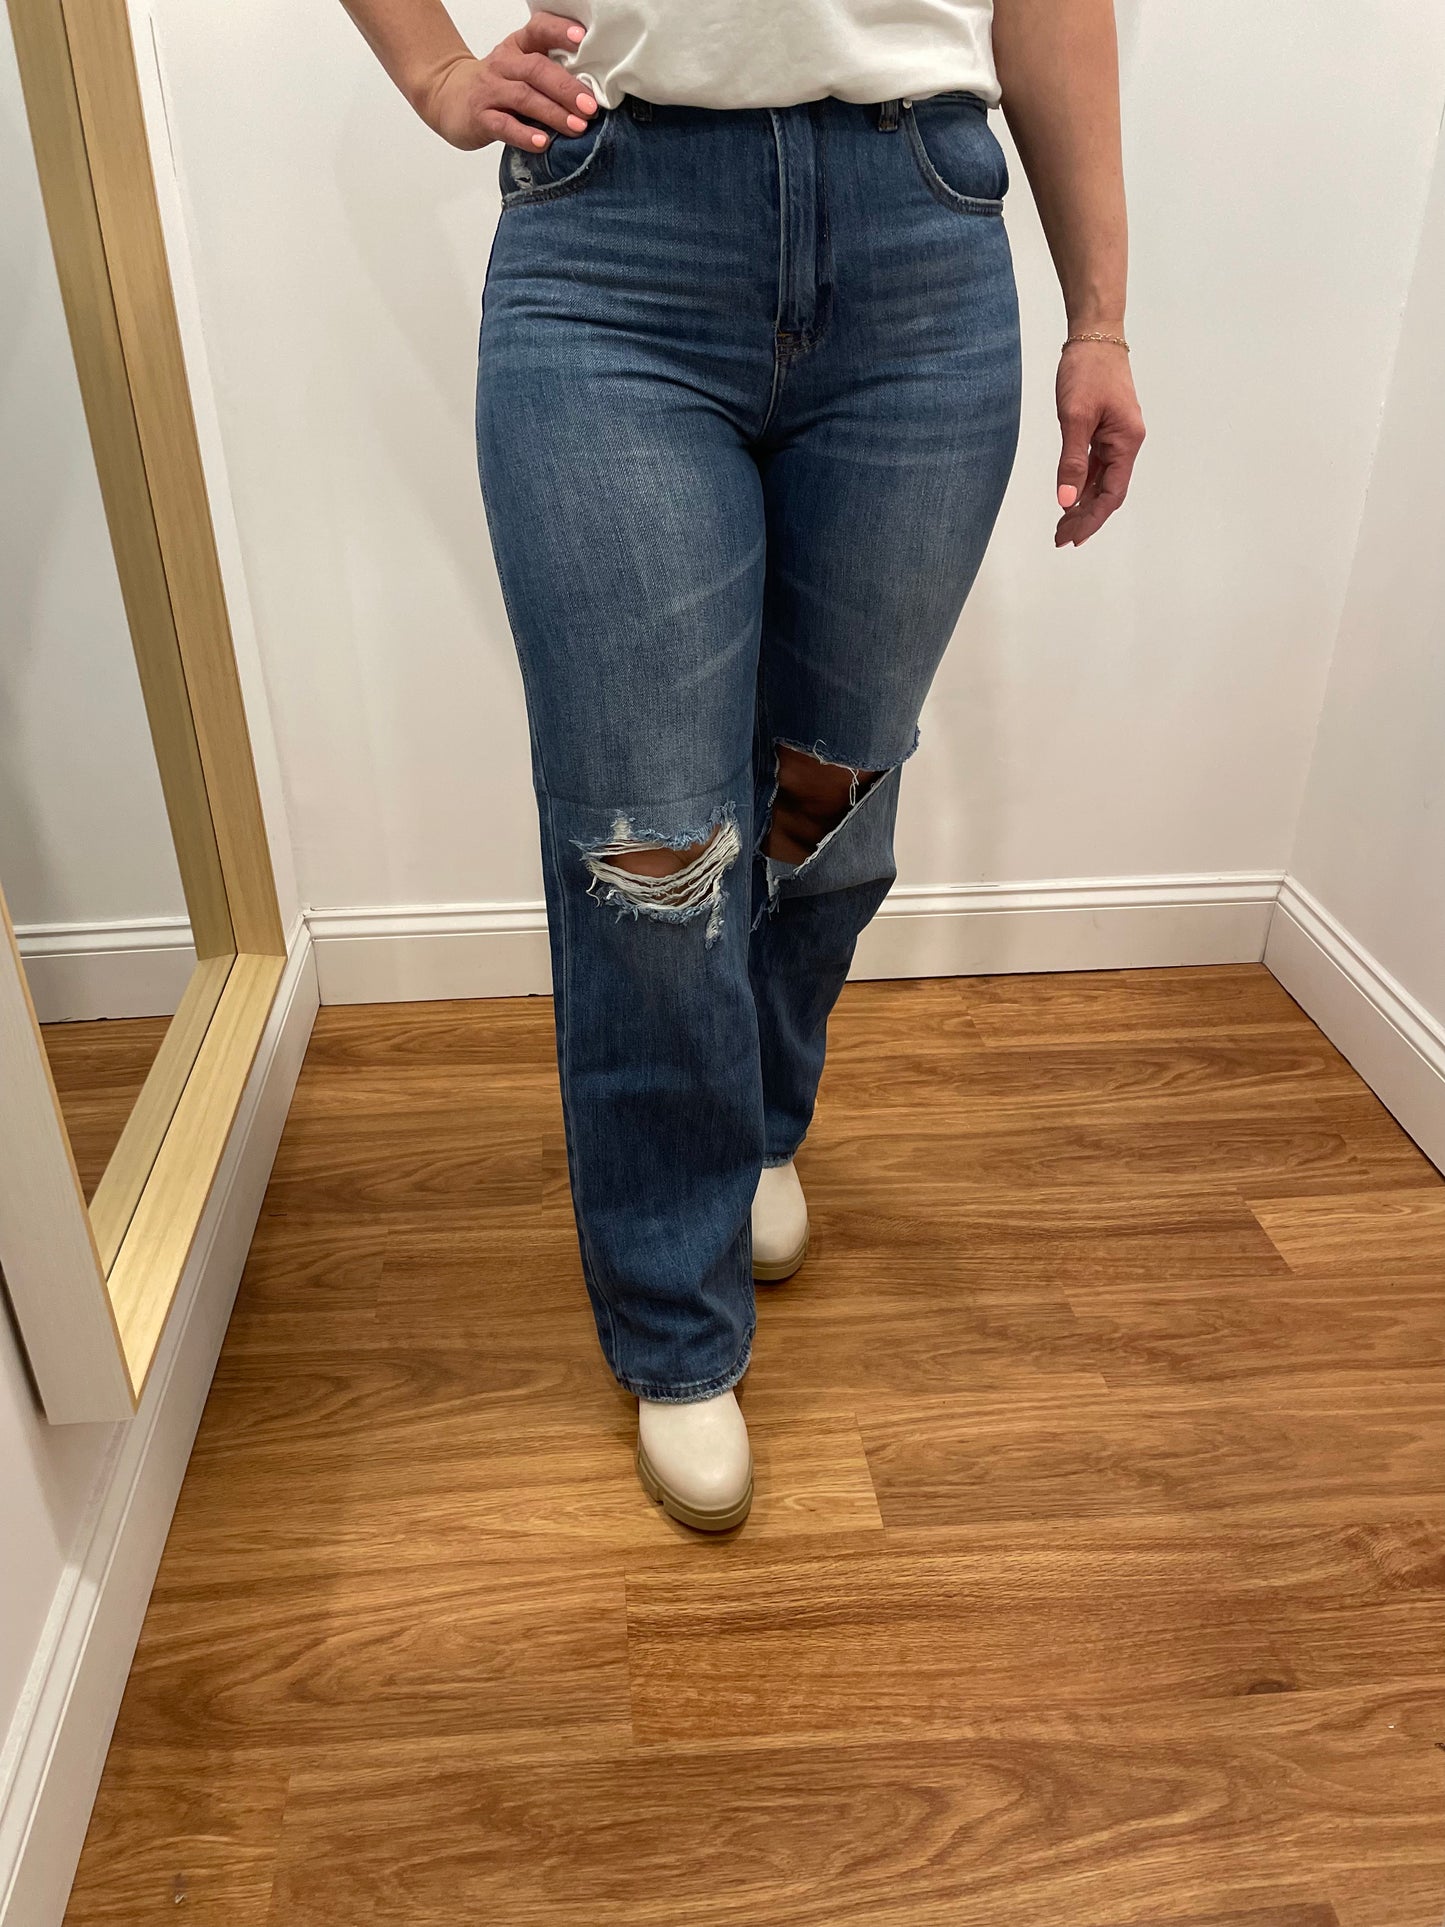 90's Comfy Jean - Size 11 & 13